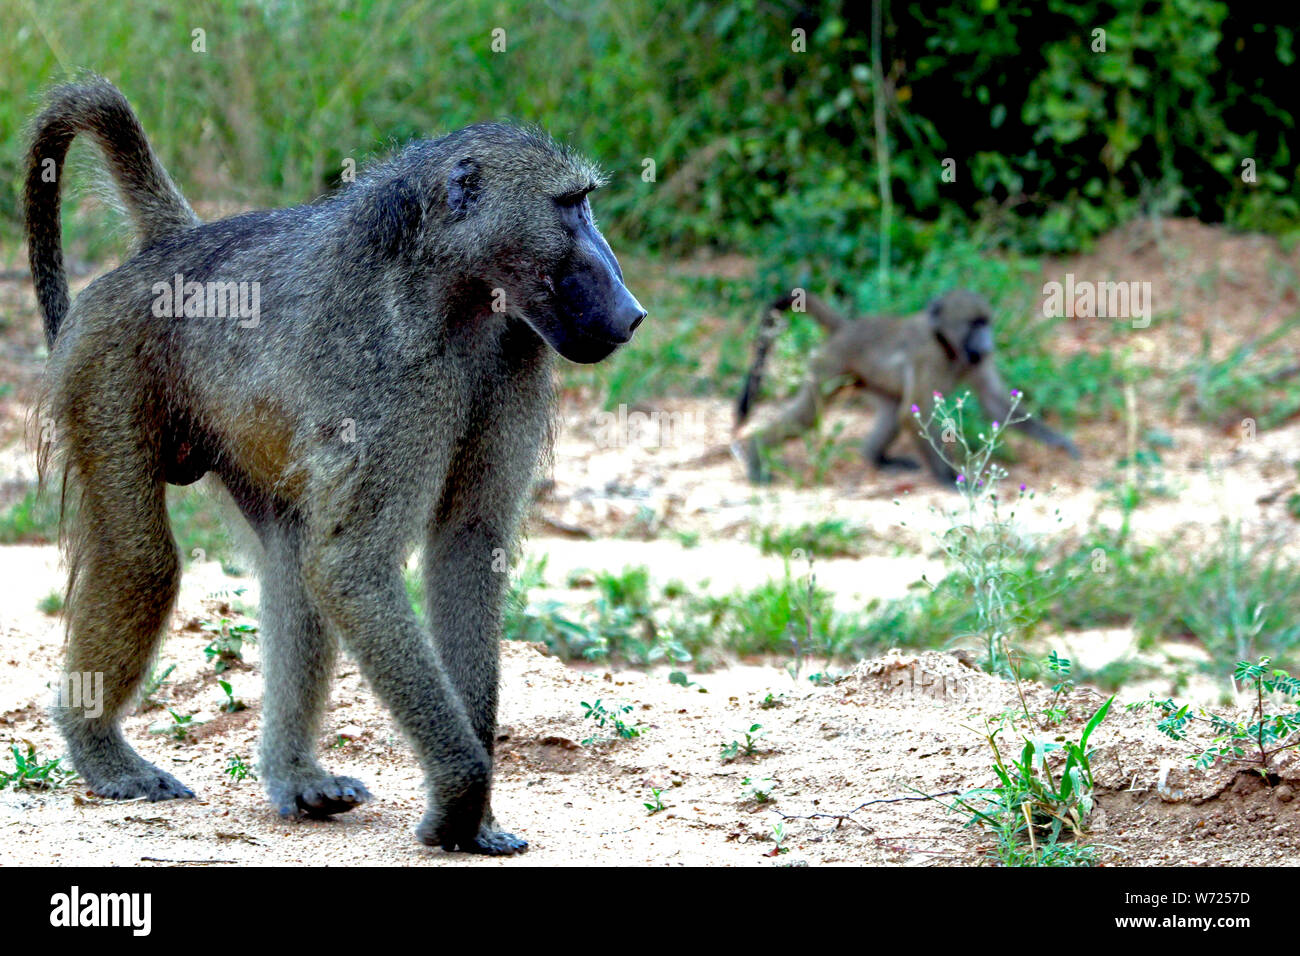 Baboon with baby in the background in freedom in the national park in South Africa Stock Photo